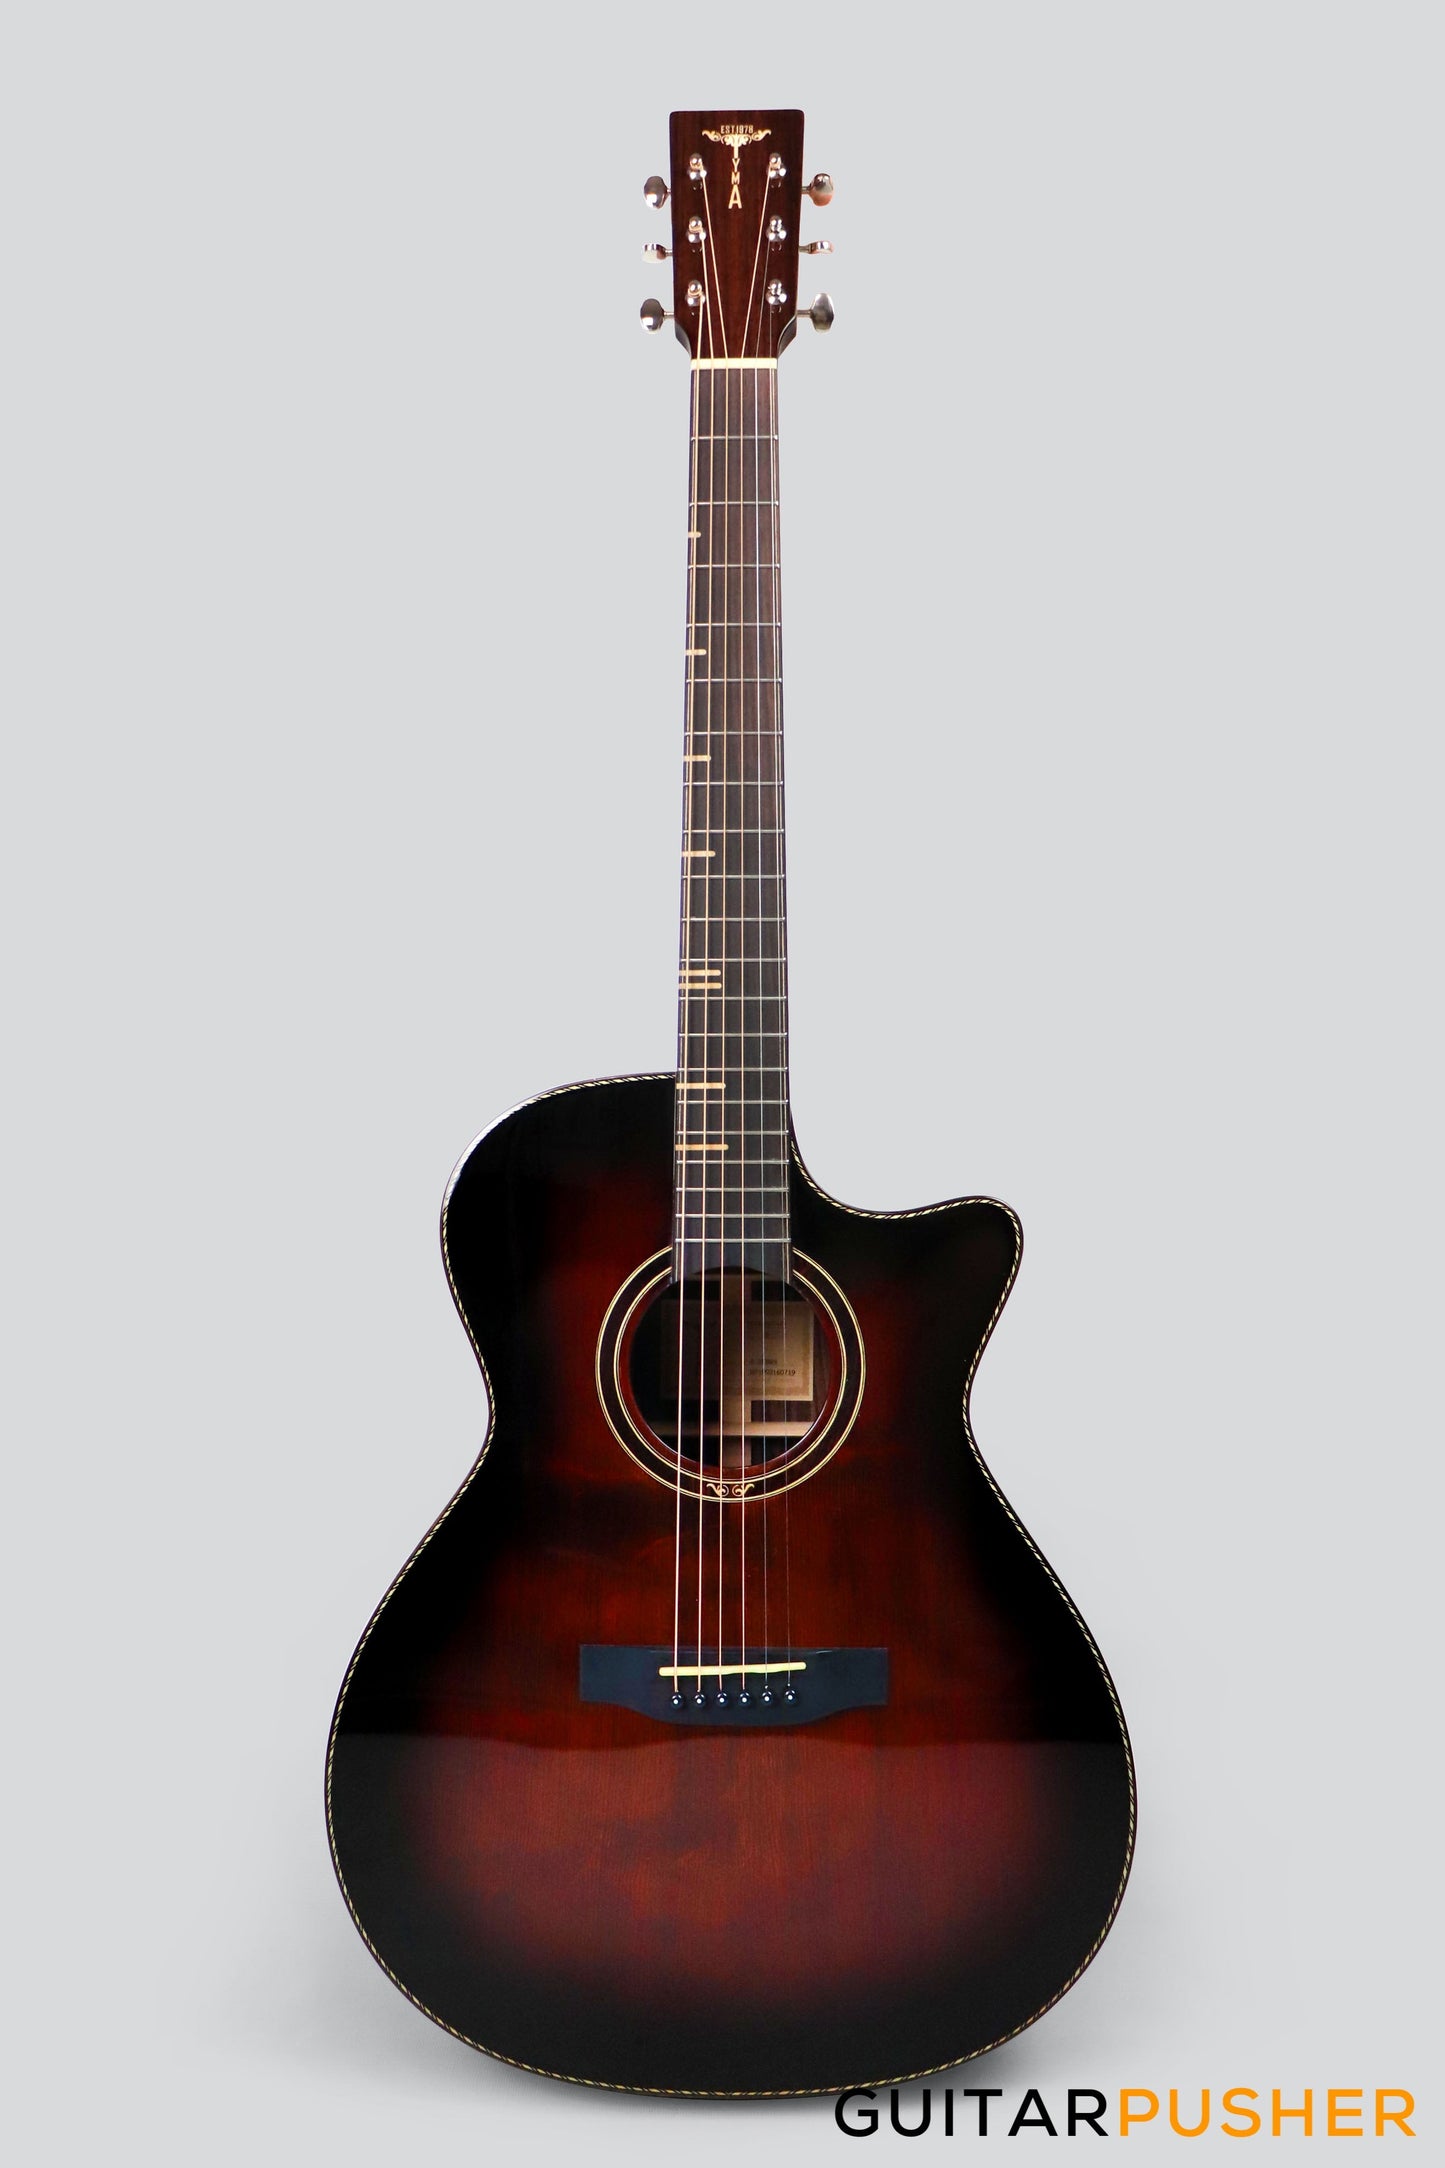 Tyma G-20 Solid Top Auditorium Acoustic-Electric Guitar Spruce/Rosewood - Brown Sunburst